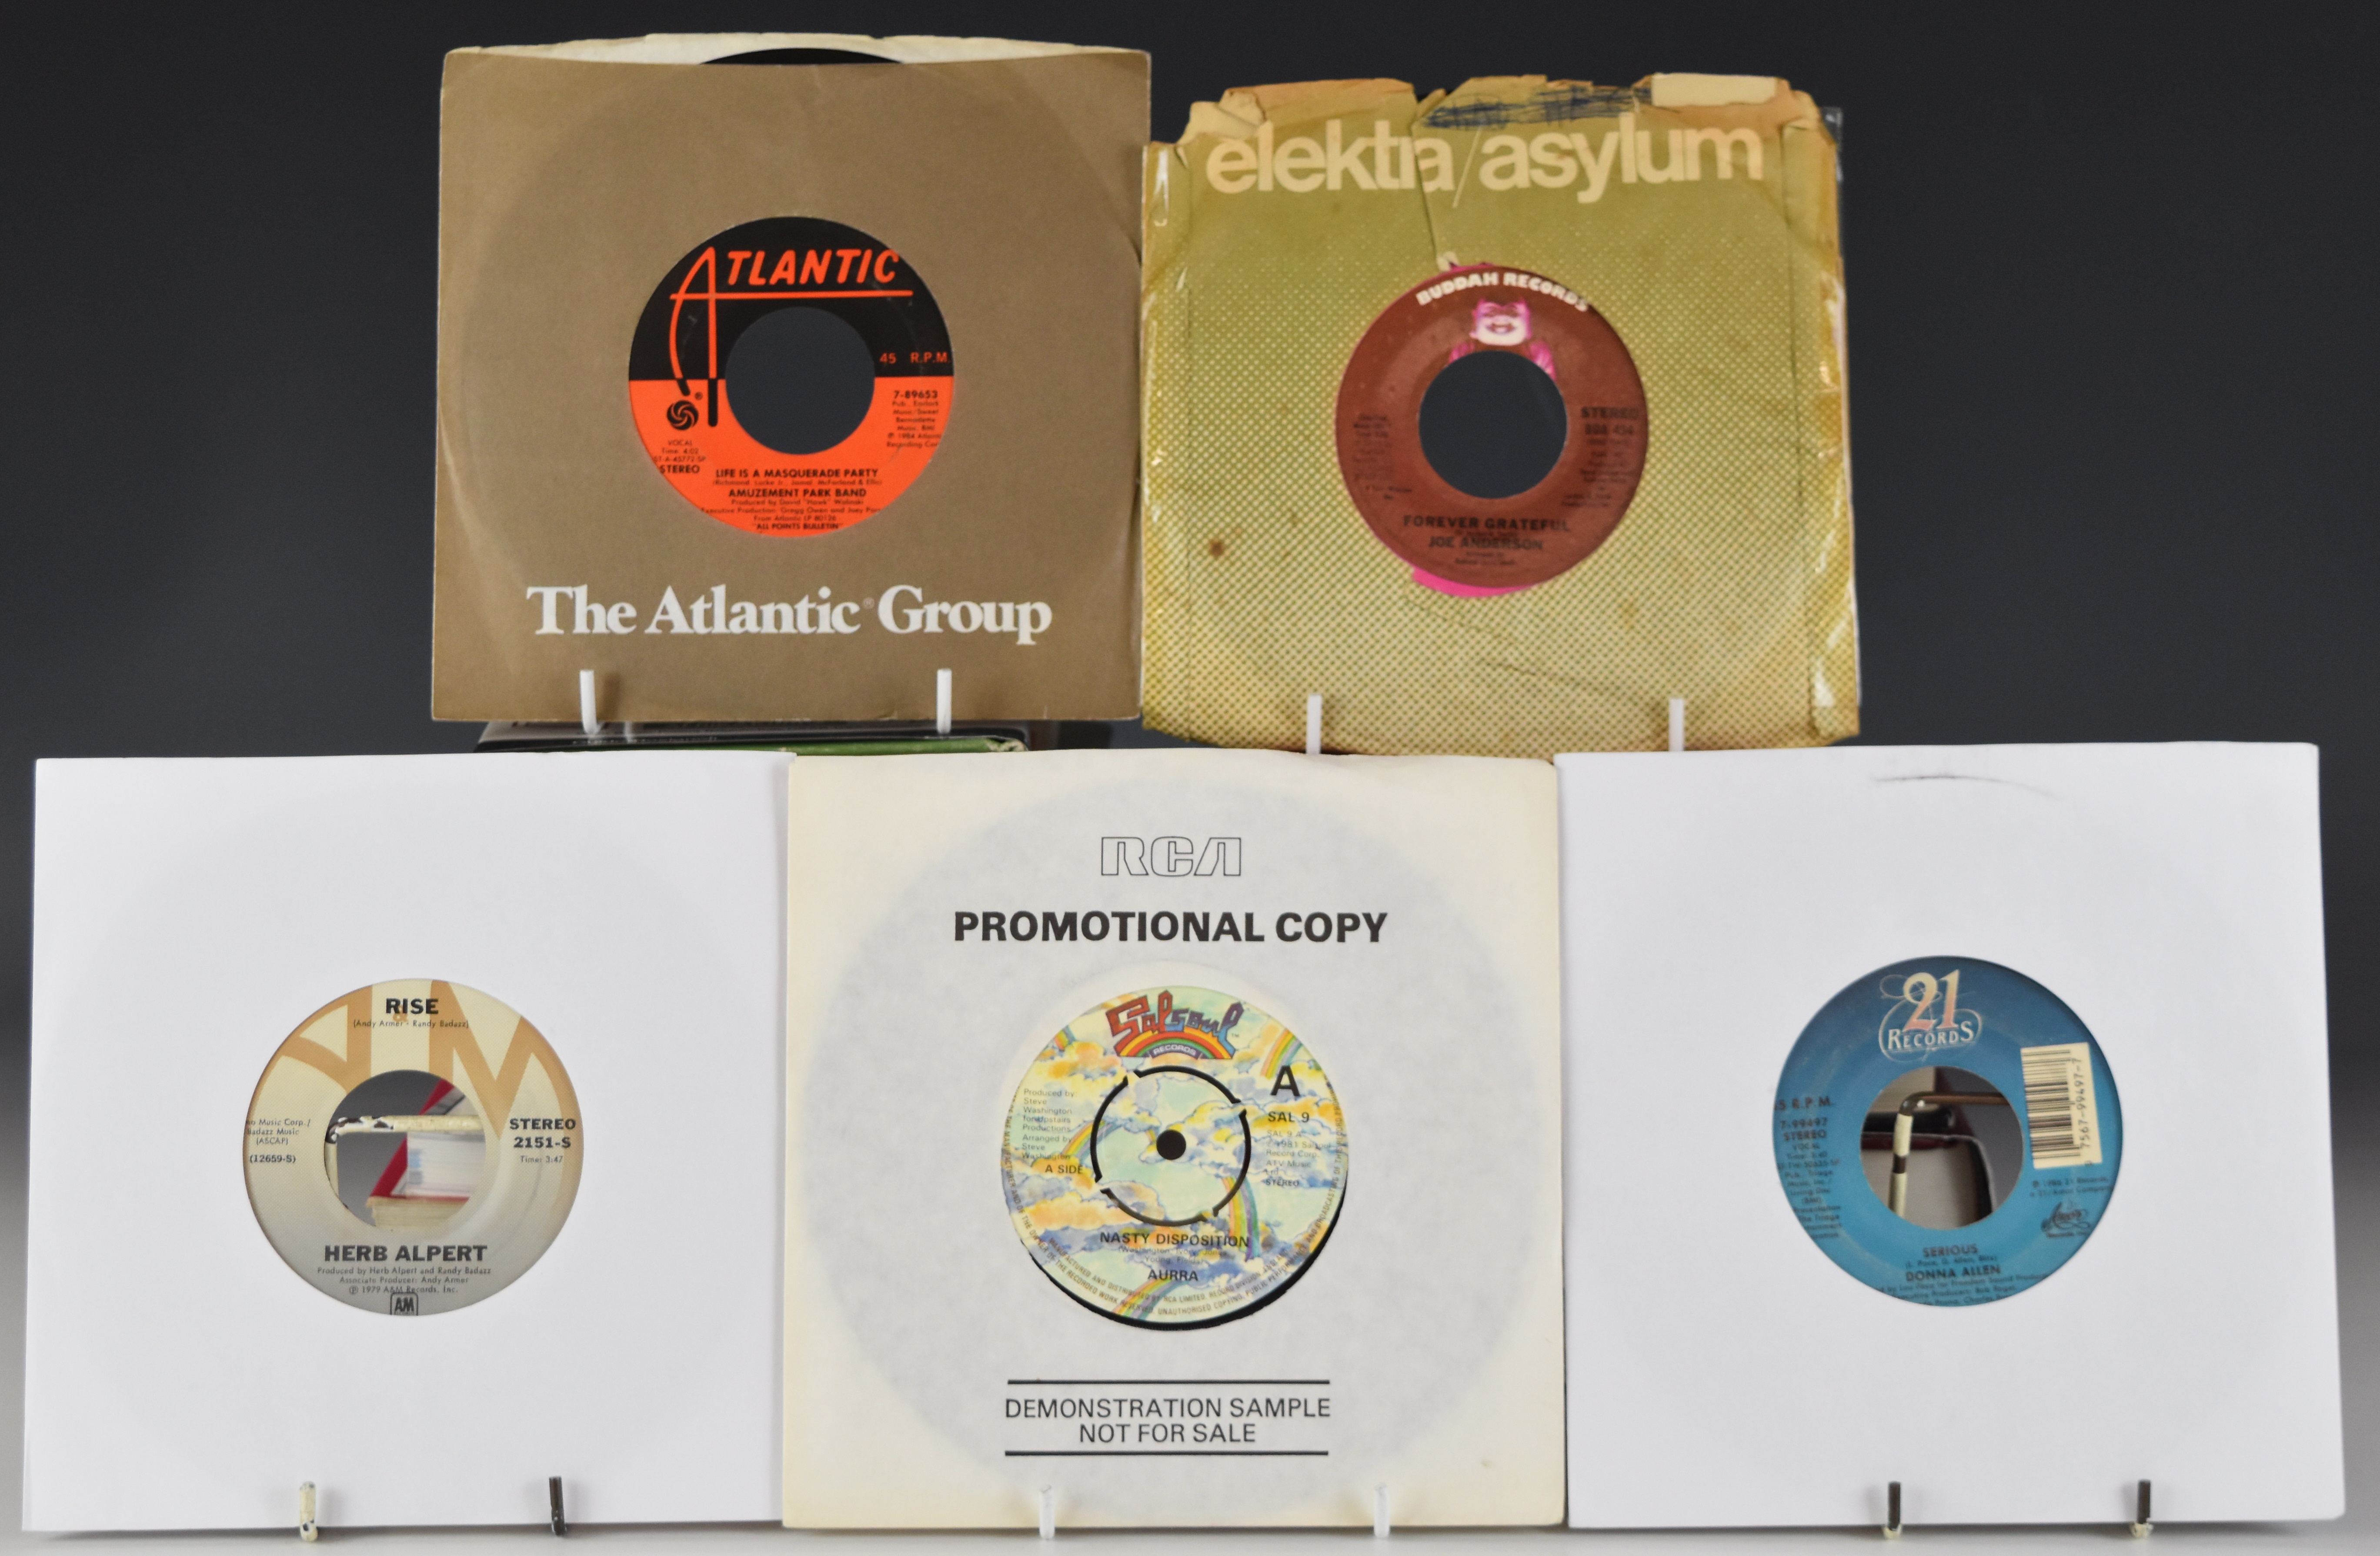 Professional DJ case containing over 500 Soul, Funk & Dance 7" singles comprising approximately